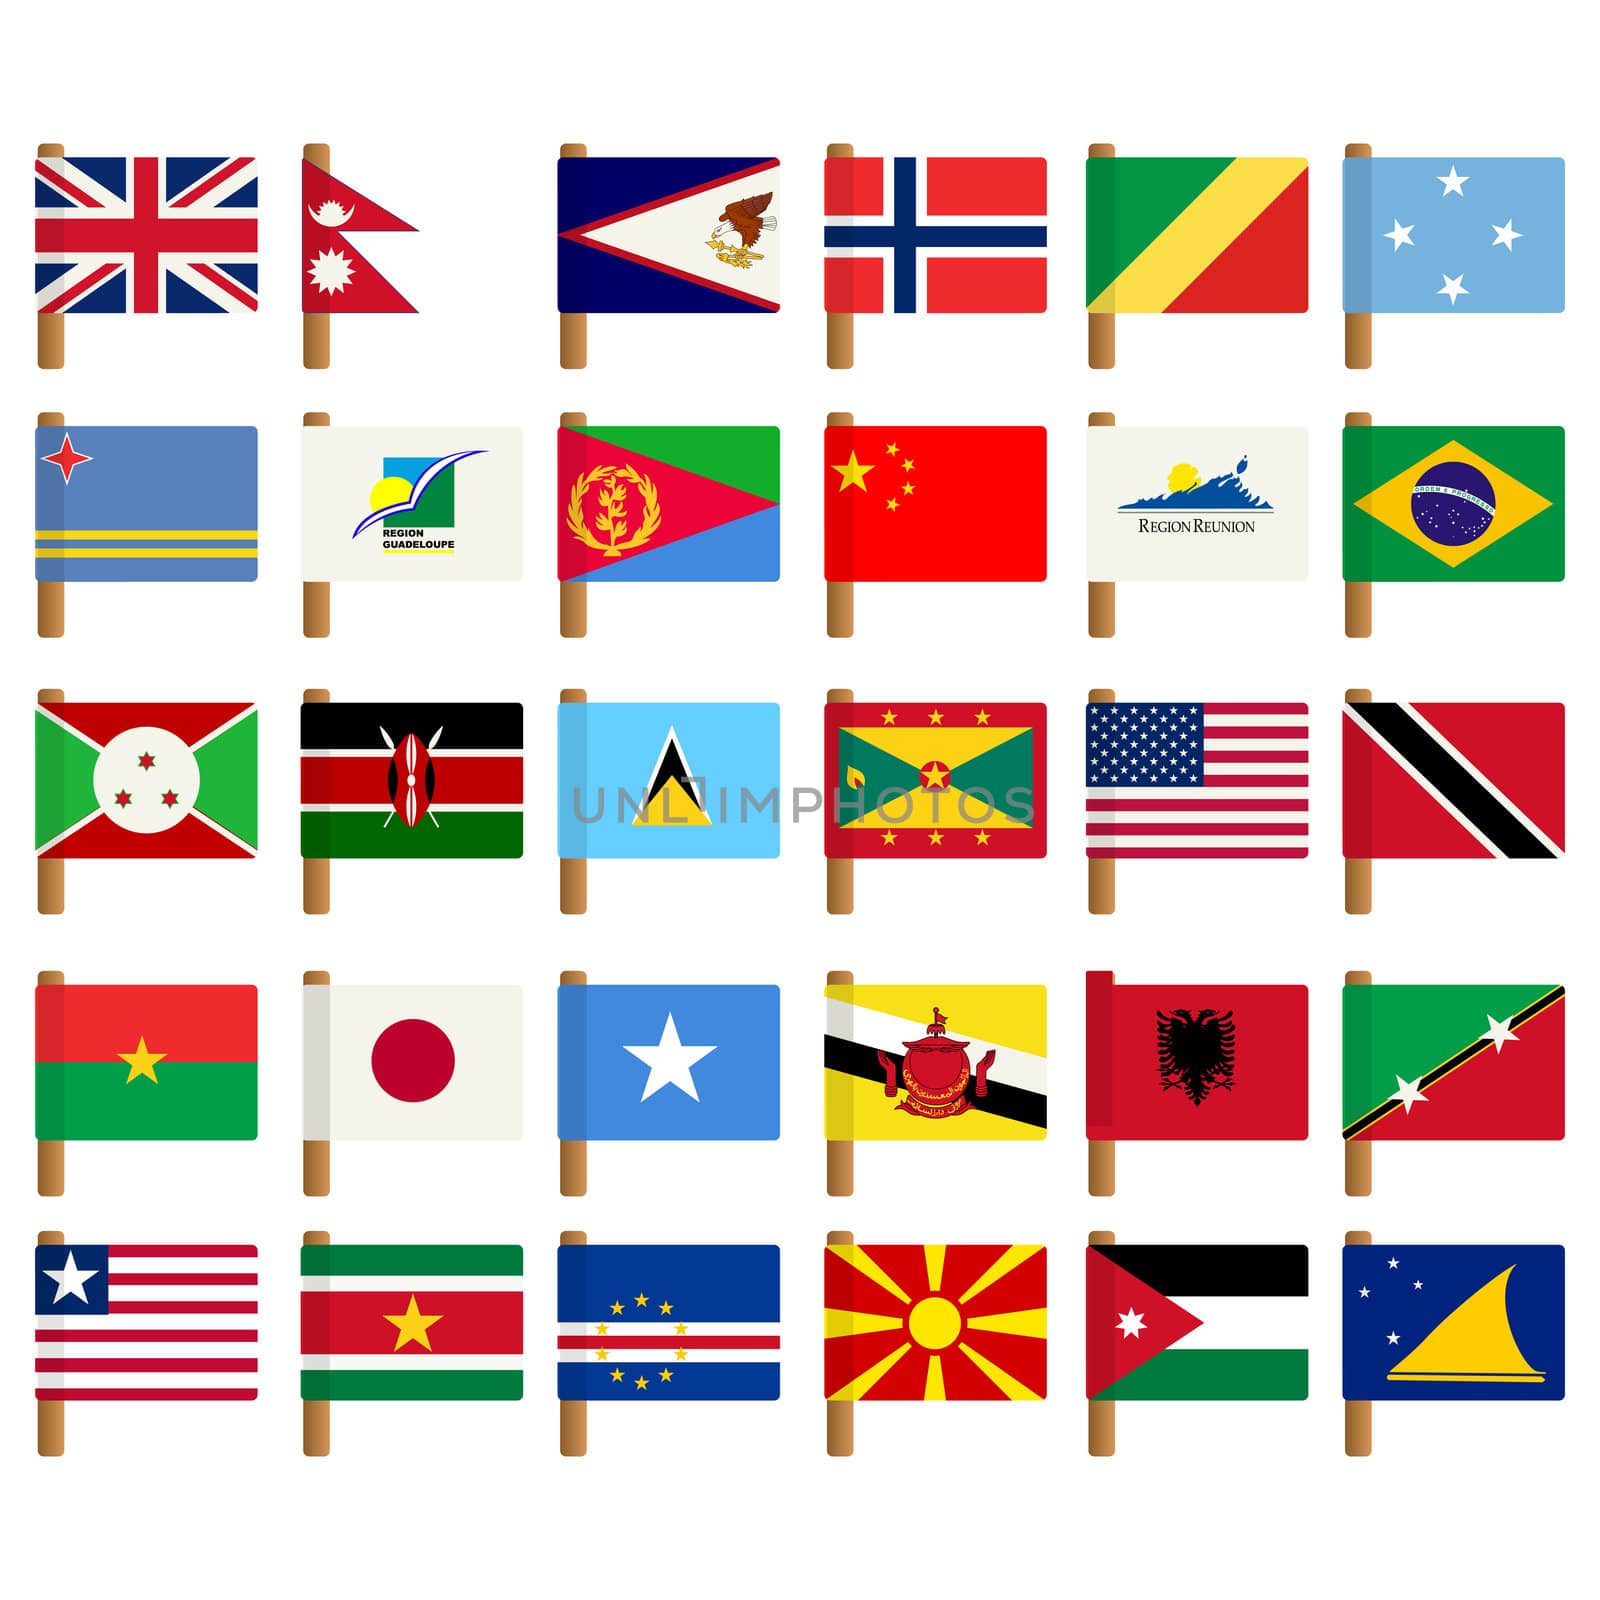 World flag icons set 5 by Lirch